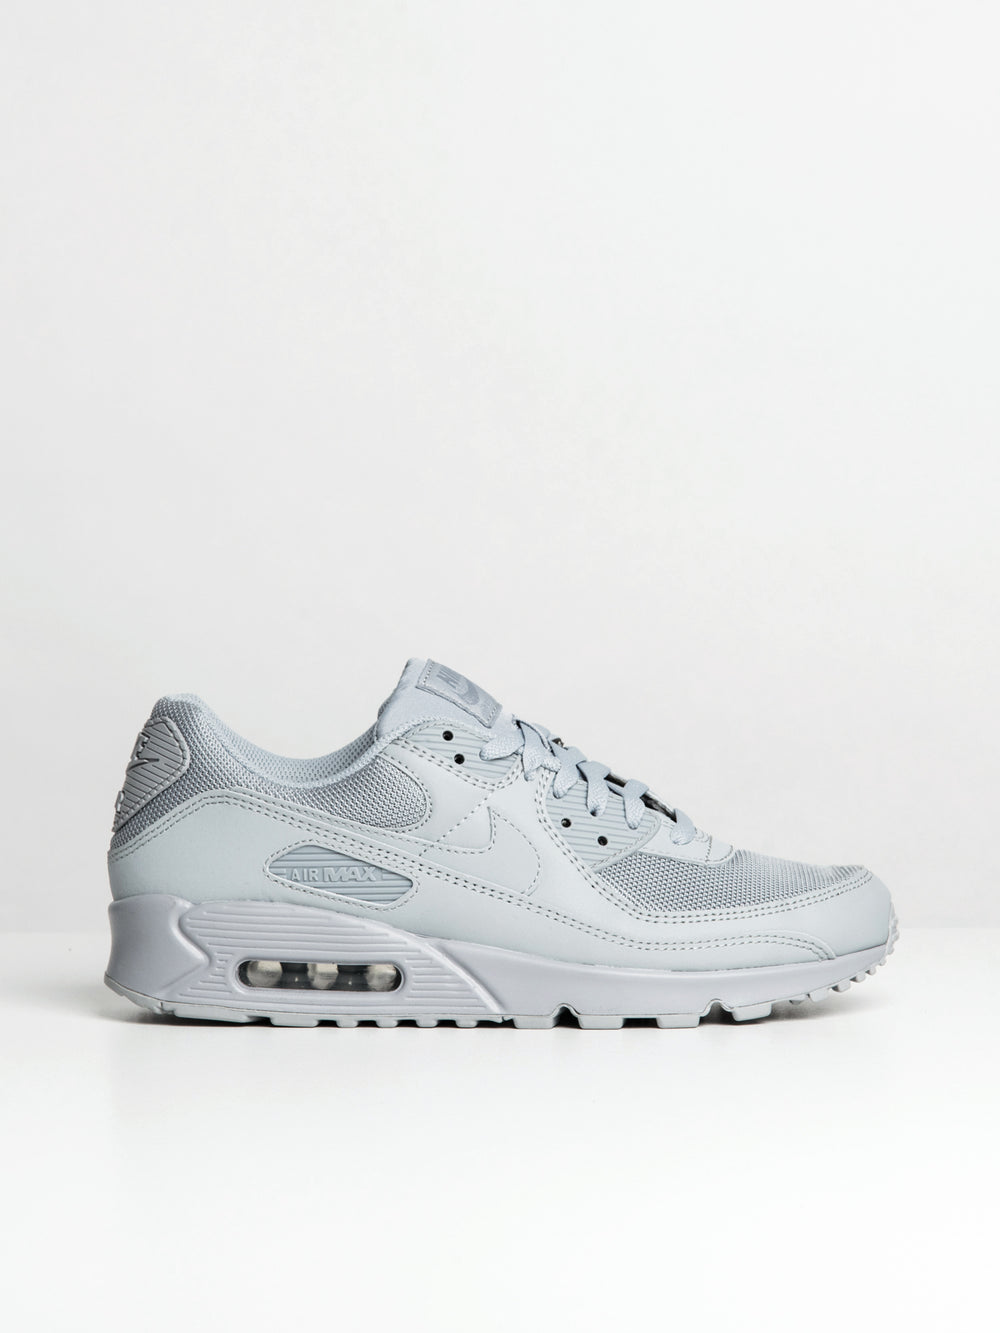 MENS NIKE AIR MAX 90 SNEAKER | Boathouse Footwear Collective